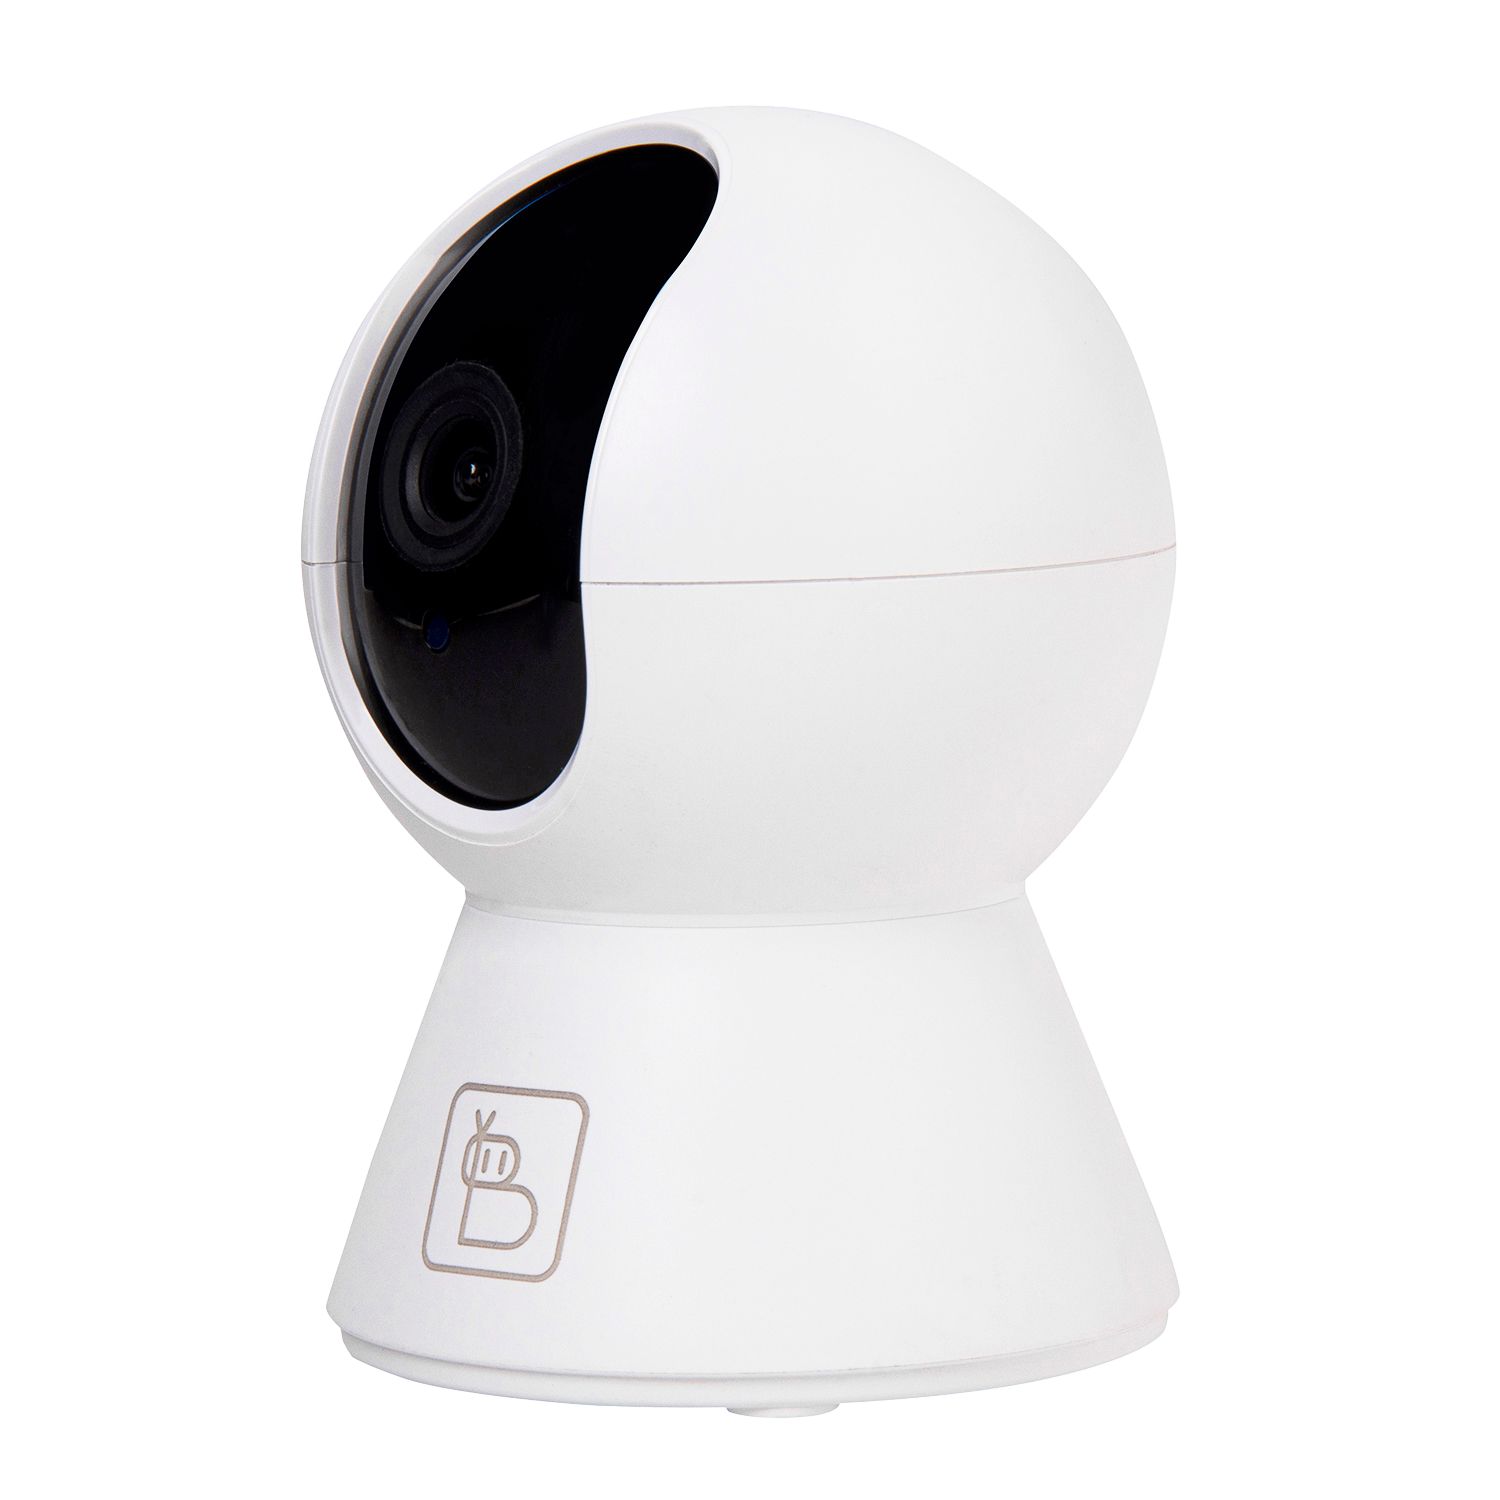 Baybot LIVE360⁰ (Now in 3 Megapixel) - Wireless Wifi camera with 360 degree view